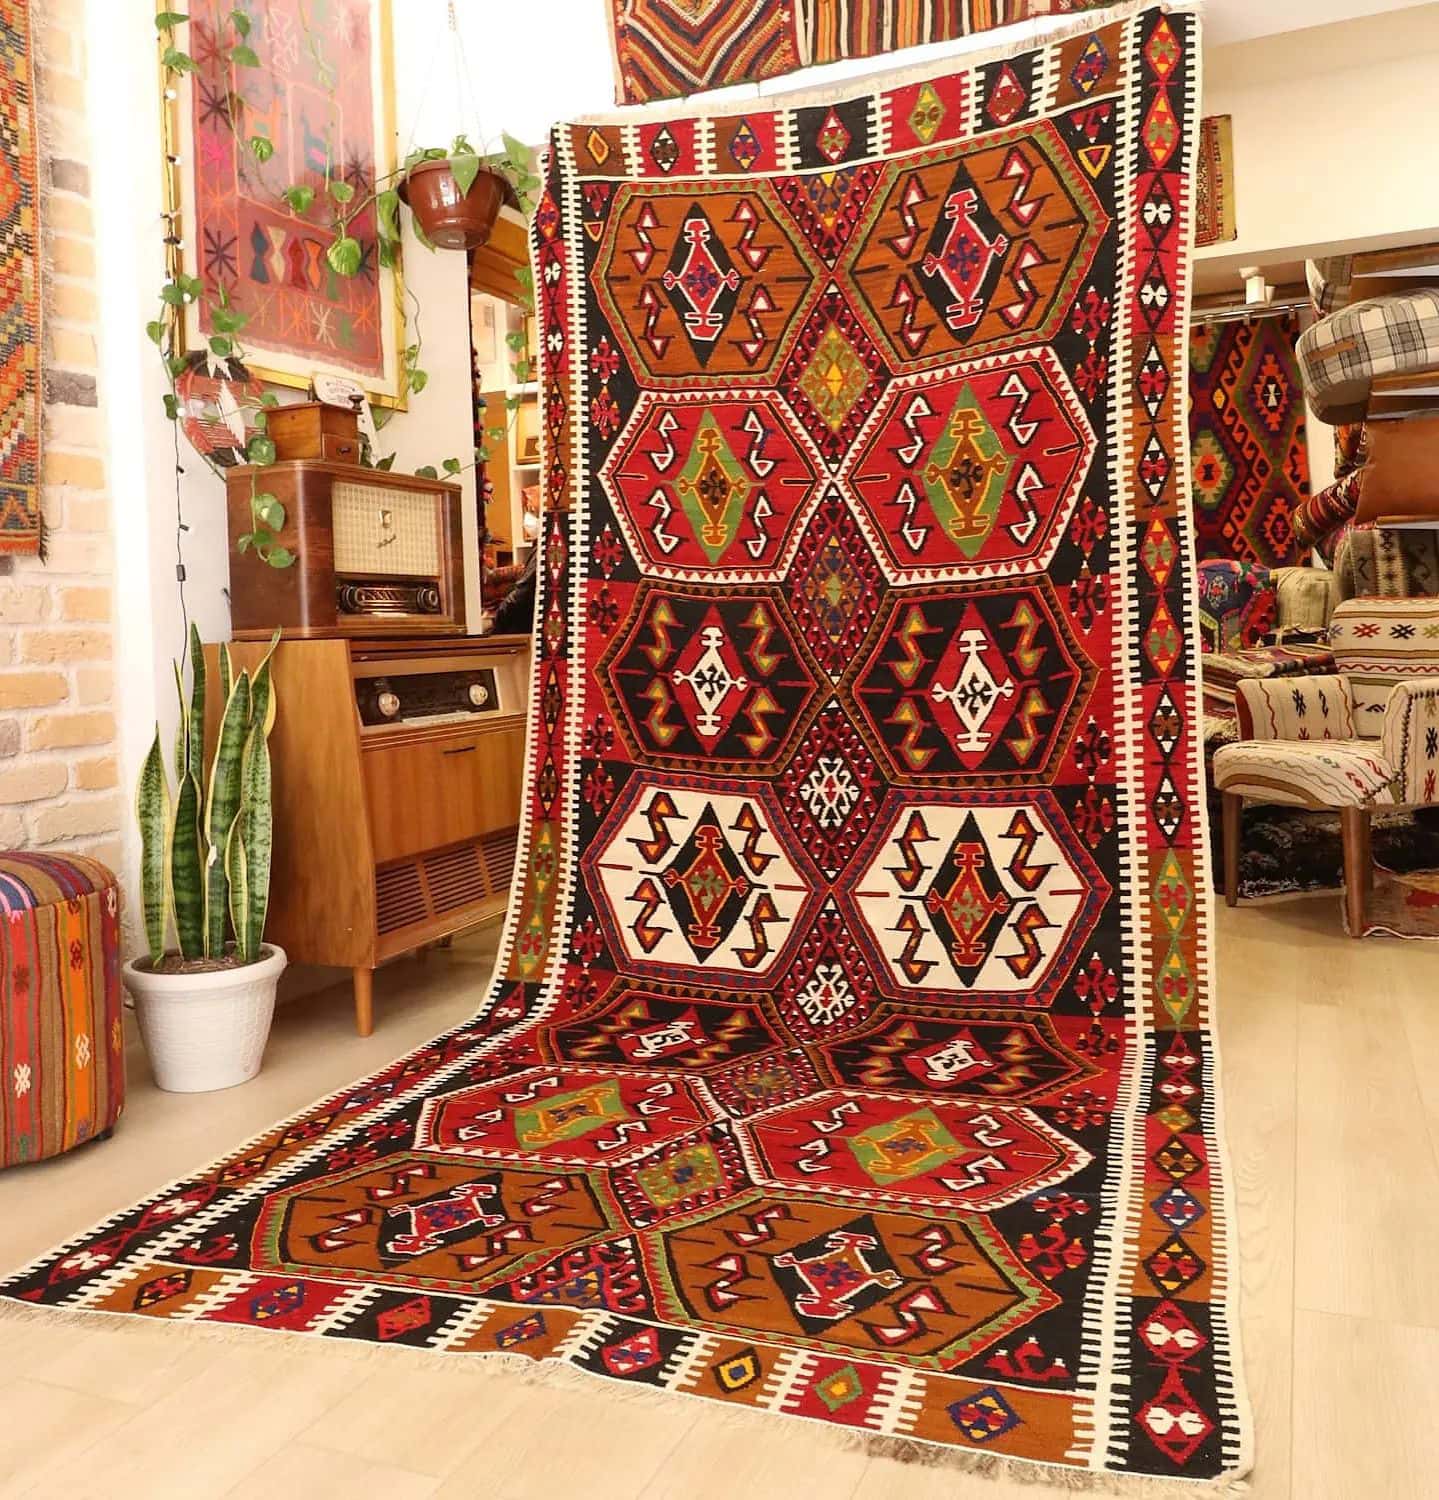 vintage handwoven flat-weave maras kilim rug with many geometric patterns in many traditional colors